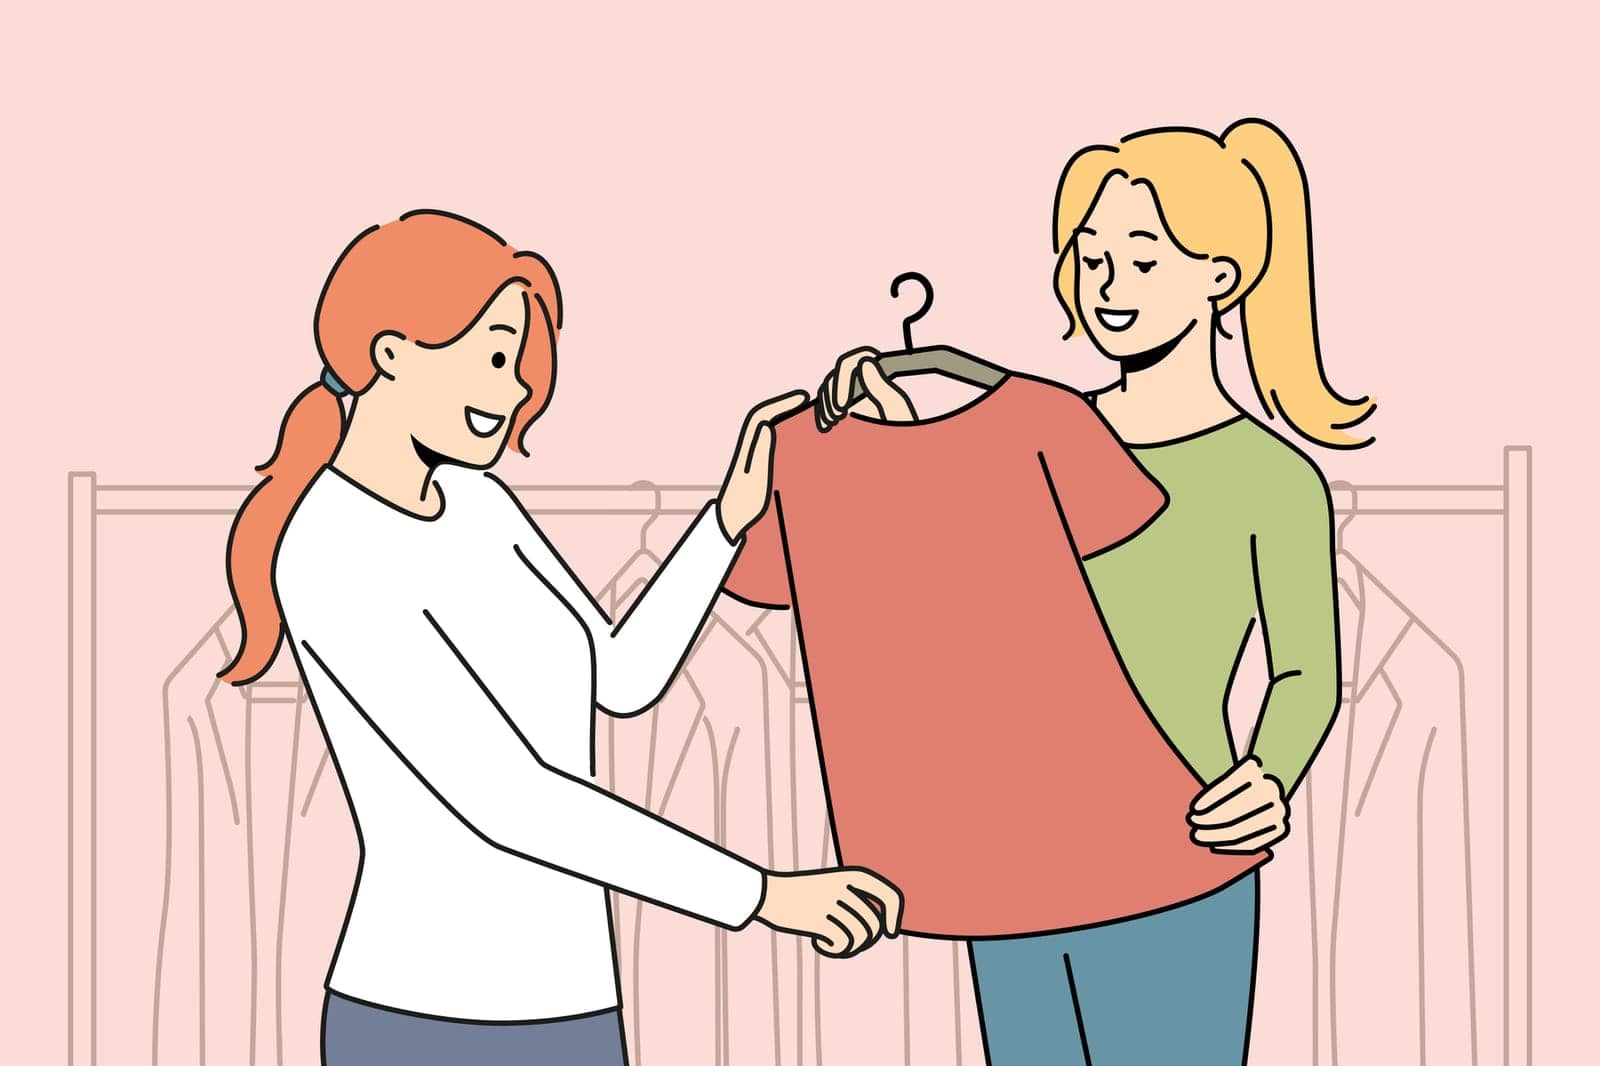 Smiling consultant help client with clothes choose in store. Woman buy apparel in boutique. Fashion and consumerism. Vector illustration.